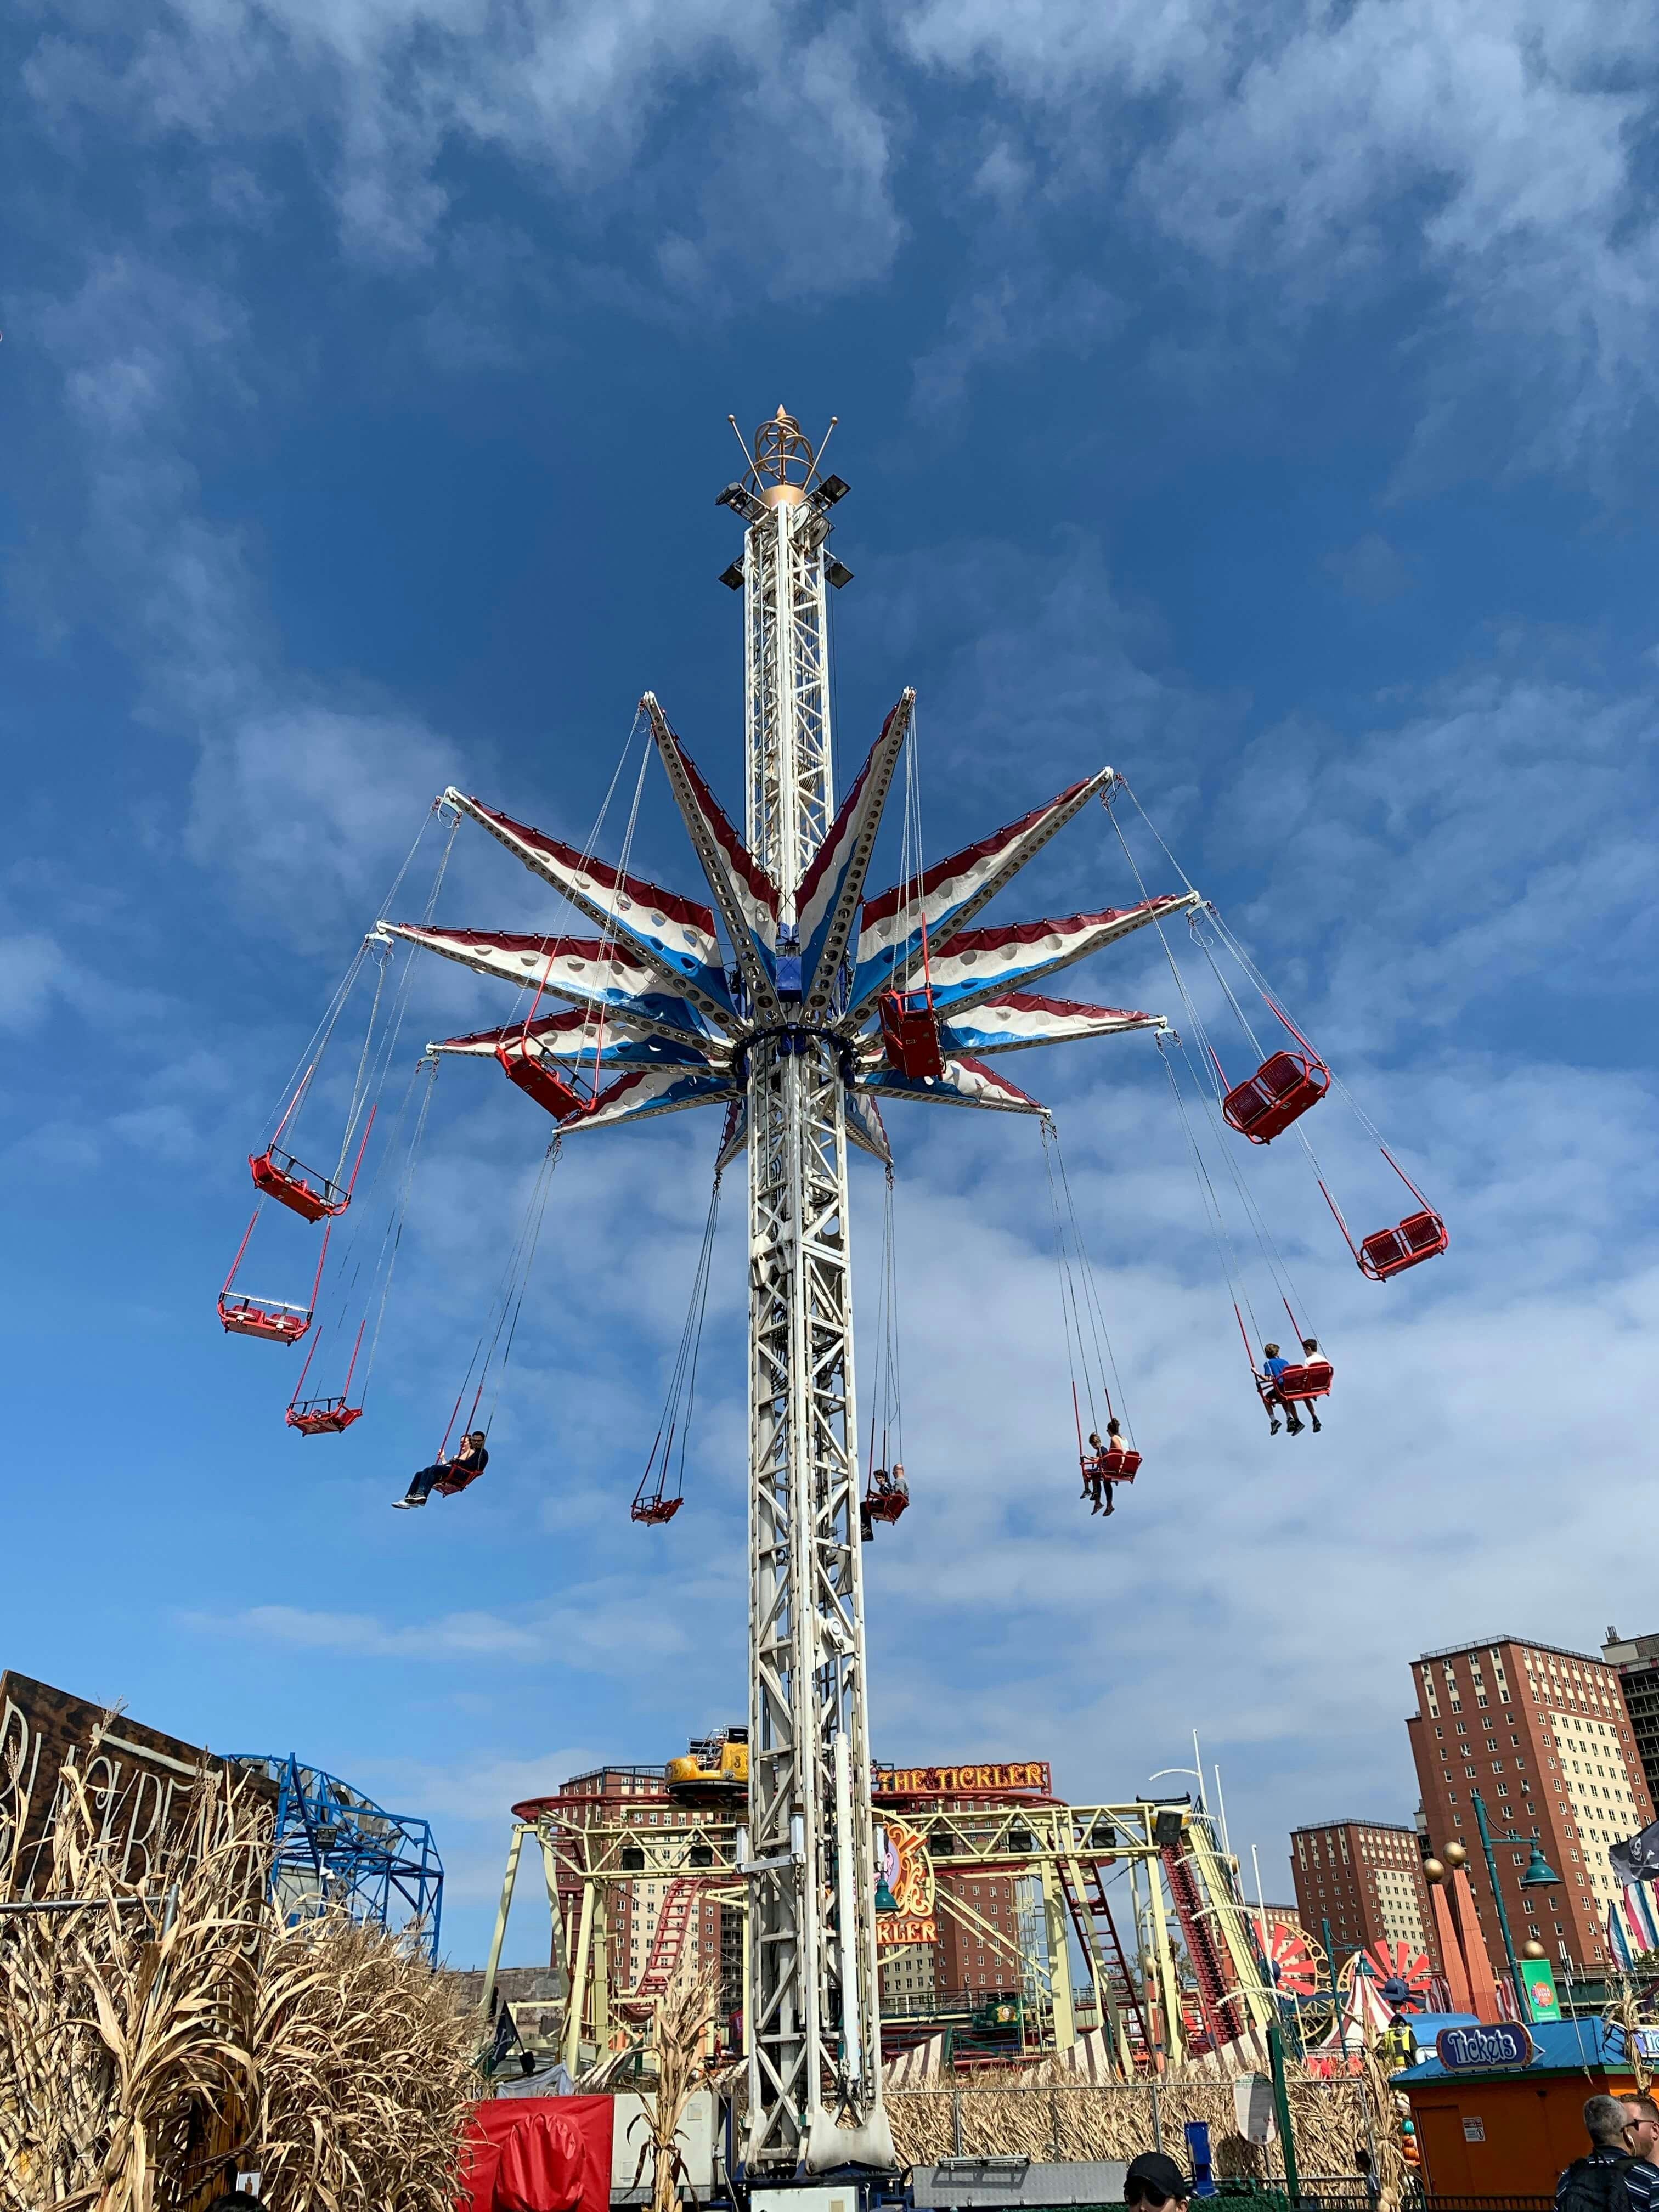 The red, white and blue swing ride of Coney Island